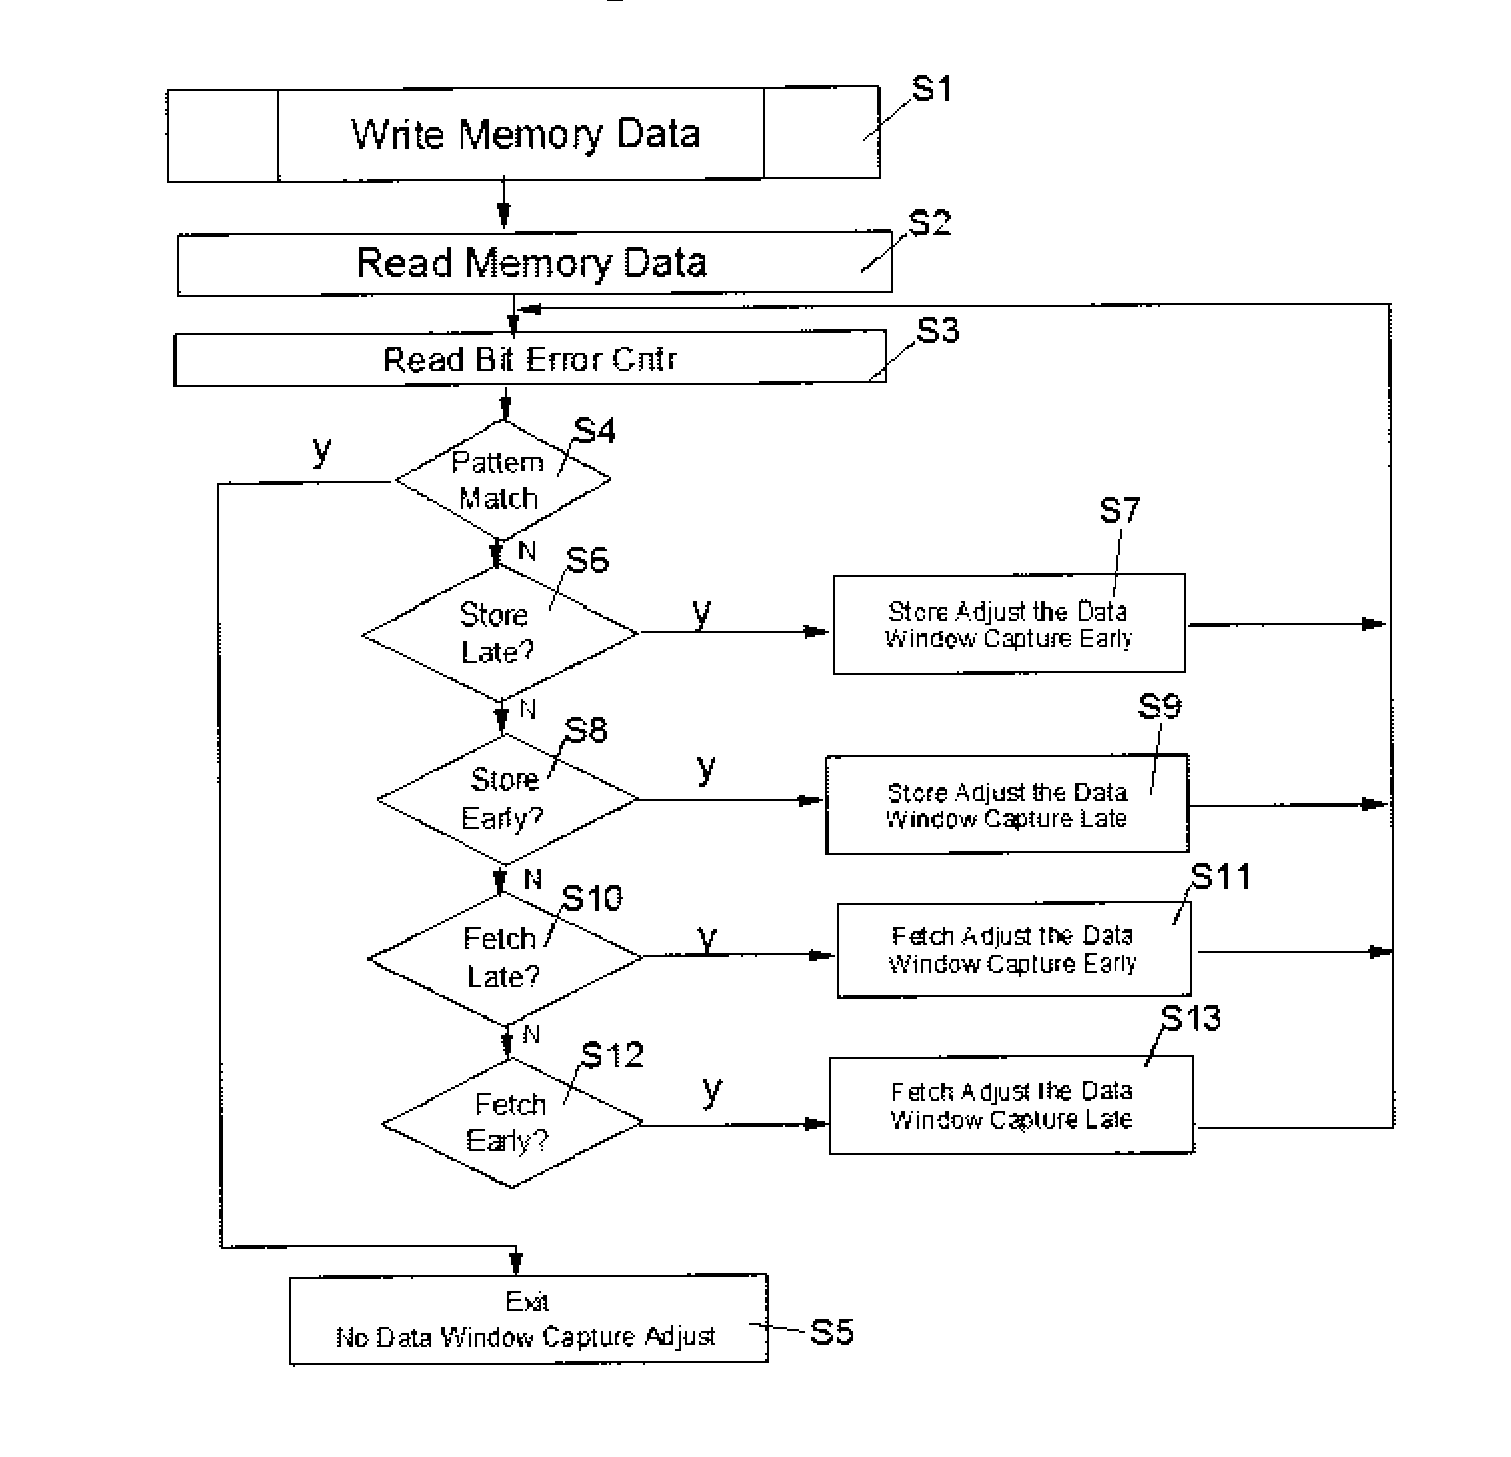 Data capture window synchronizing method for generating data bit sequences and adjusting capture window on parallel data paths